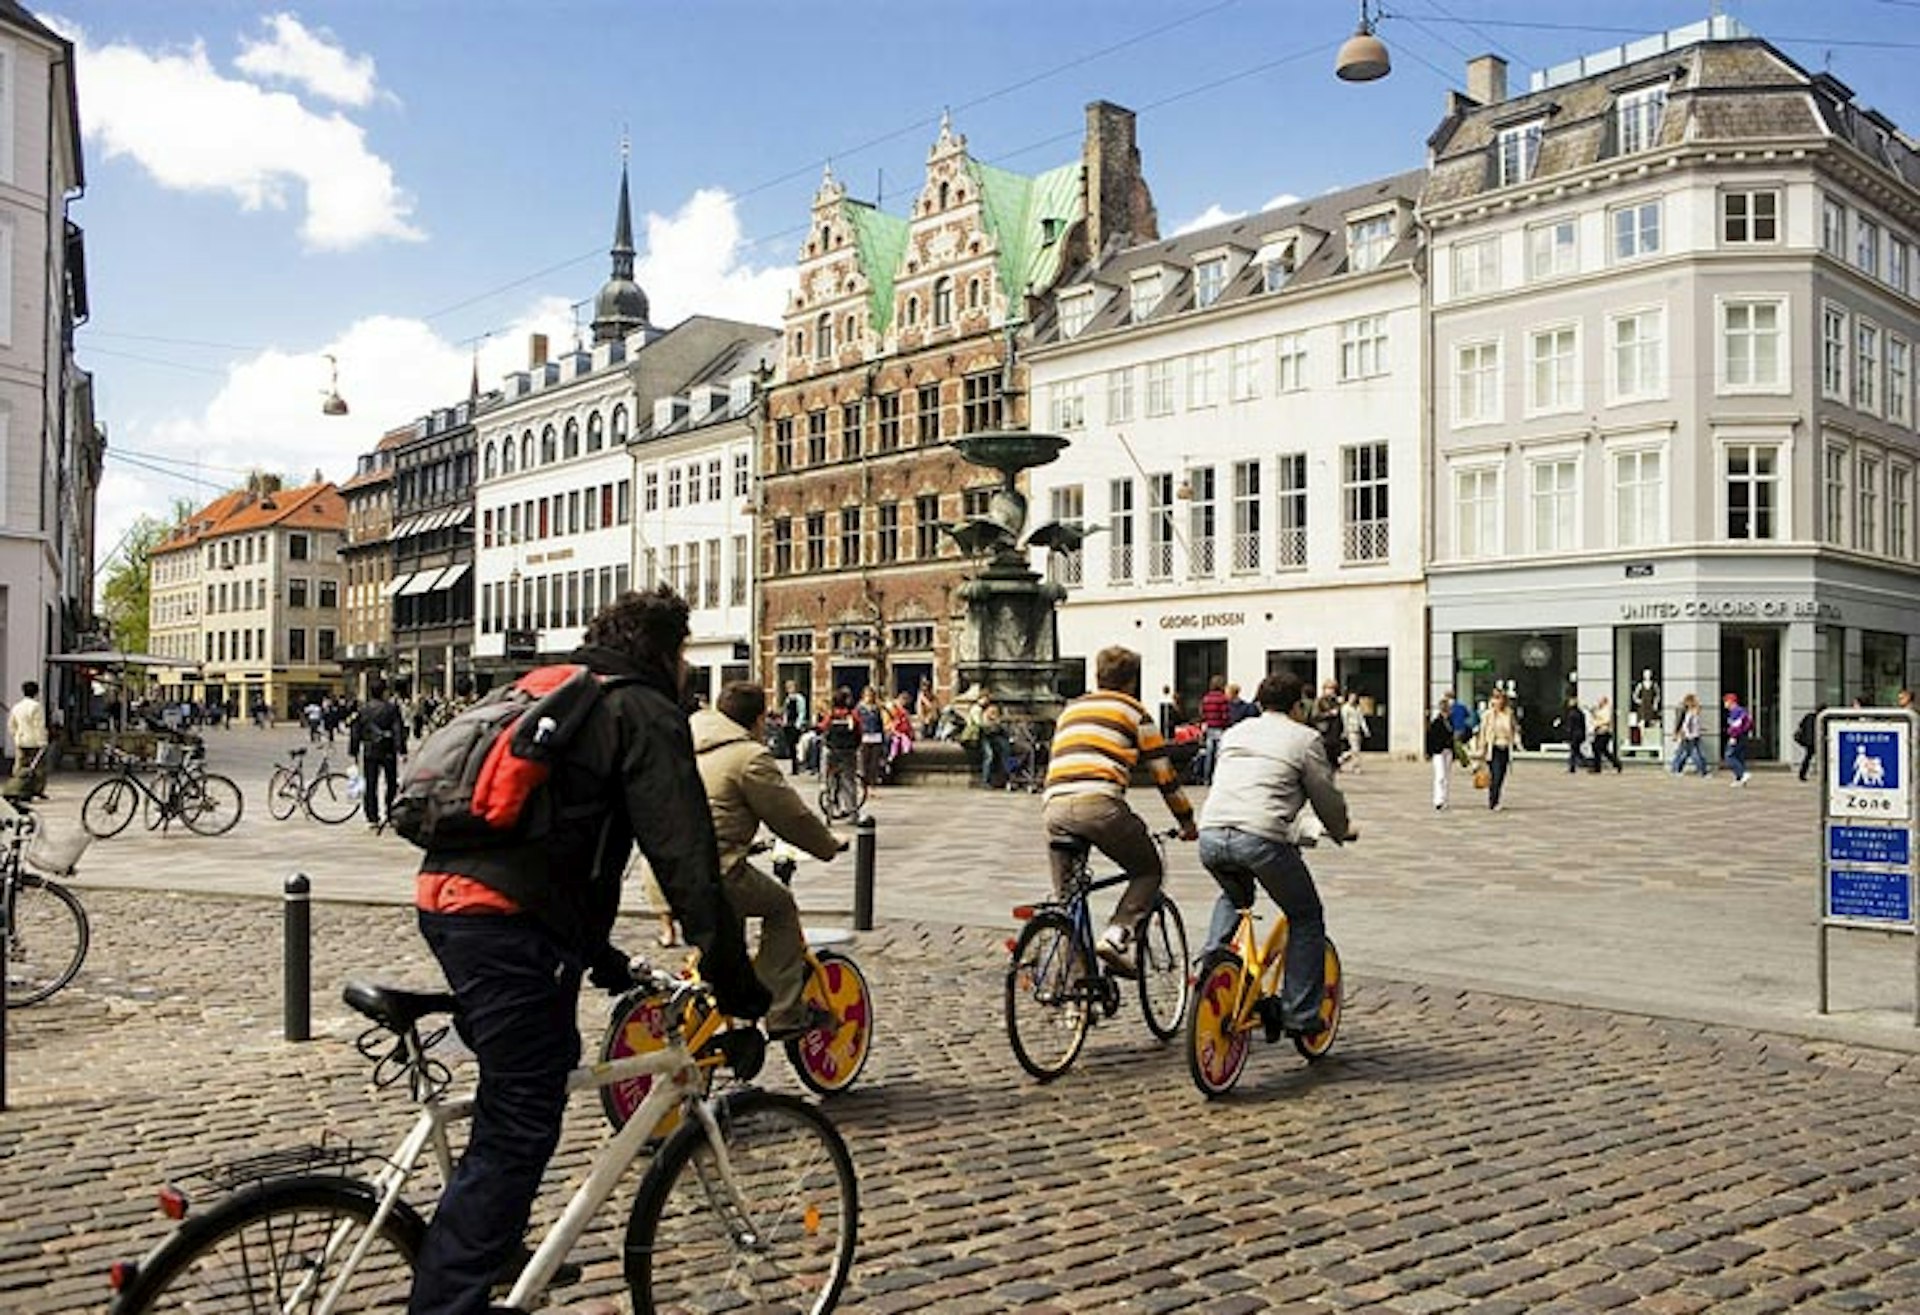 Close your eyes to the easy-going pace, cosy cafes and bike-friendly streets and conjure the Copenhagen of The Killing... Image by Dag Sundberg / Photographer's Choice / Getty Images